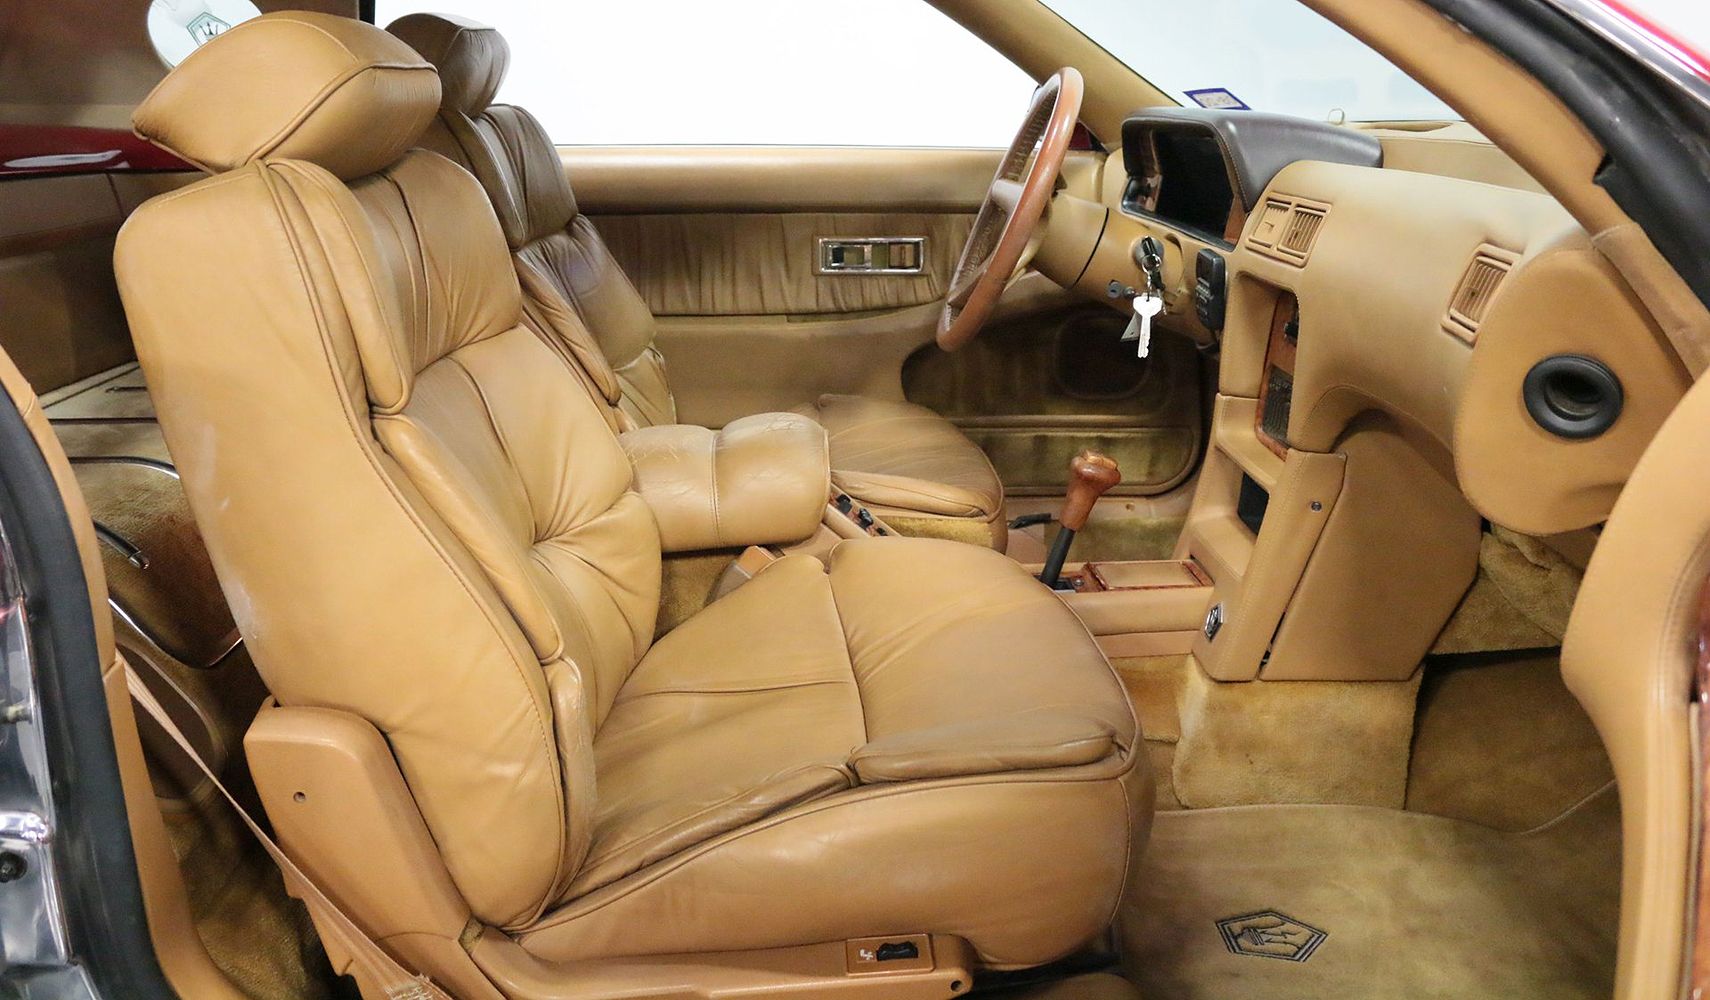 If You Looked At The TC’s Interior, Things Were Very, Very Different. A Lot Of It, Seats, Armrests, And More Were Dressed In Hand-Stitched Leather